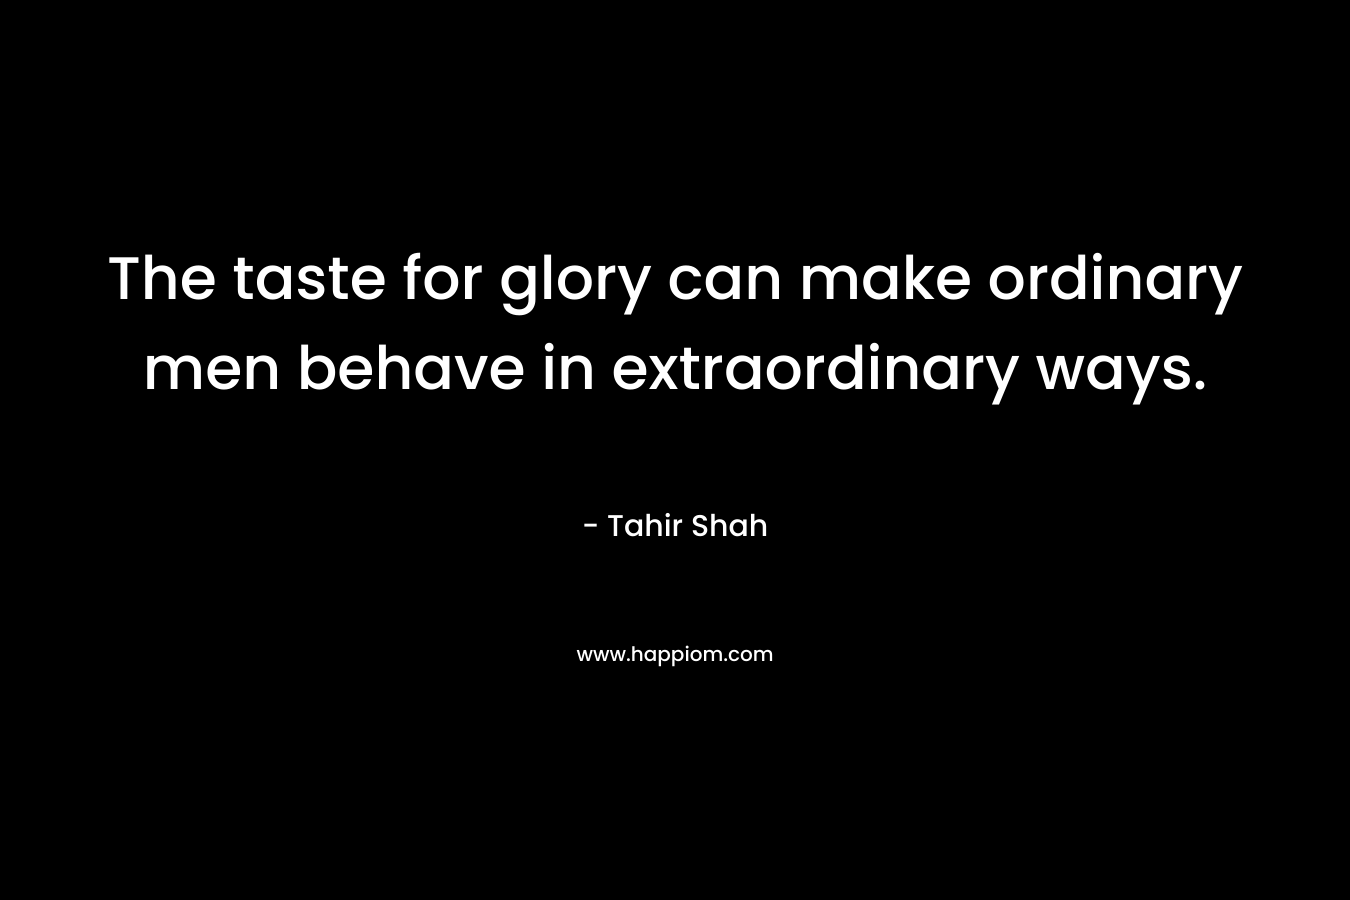 The taste for glory can make ordinary men behave in extraordinary ways. – Tahir Shah